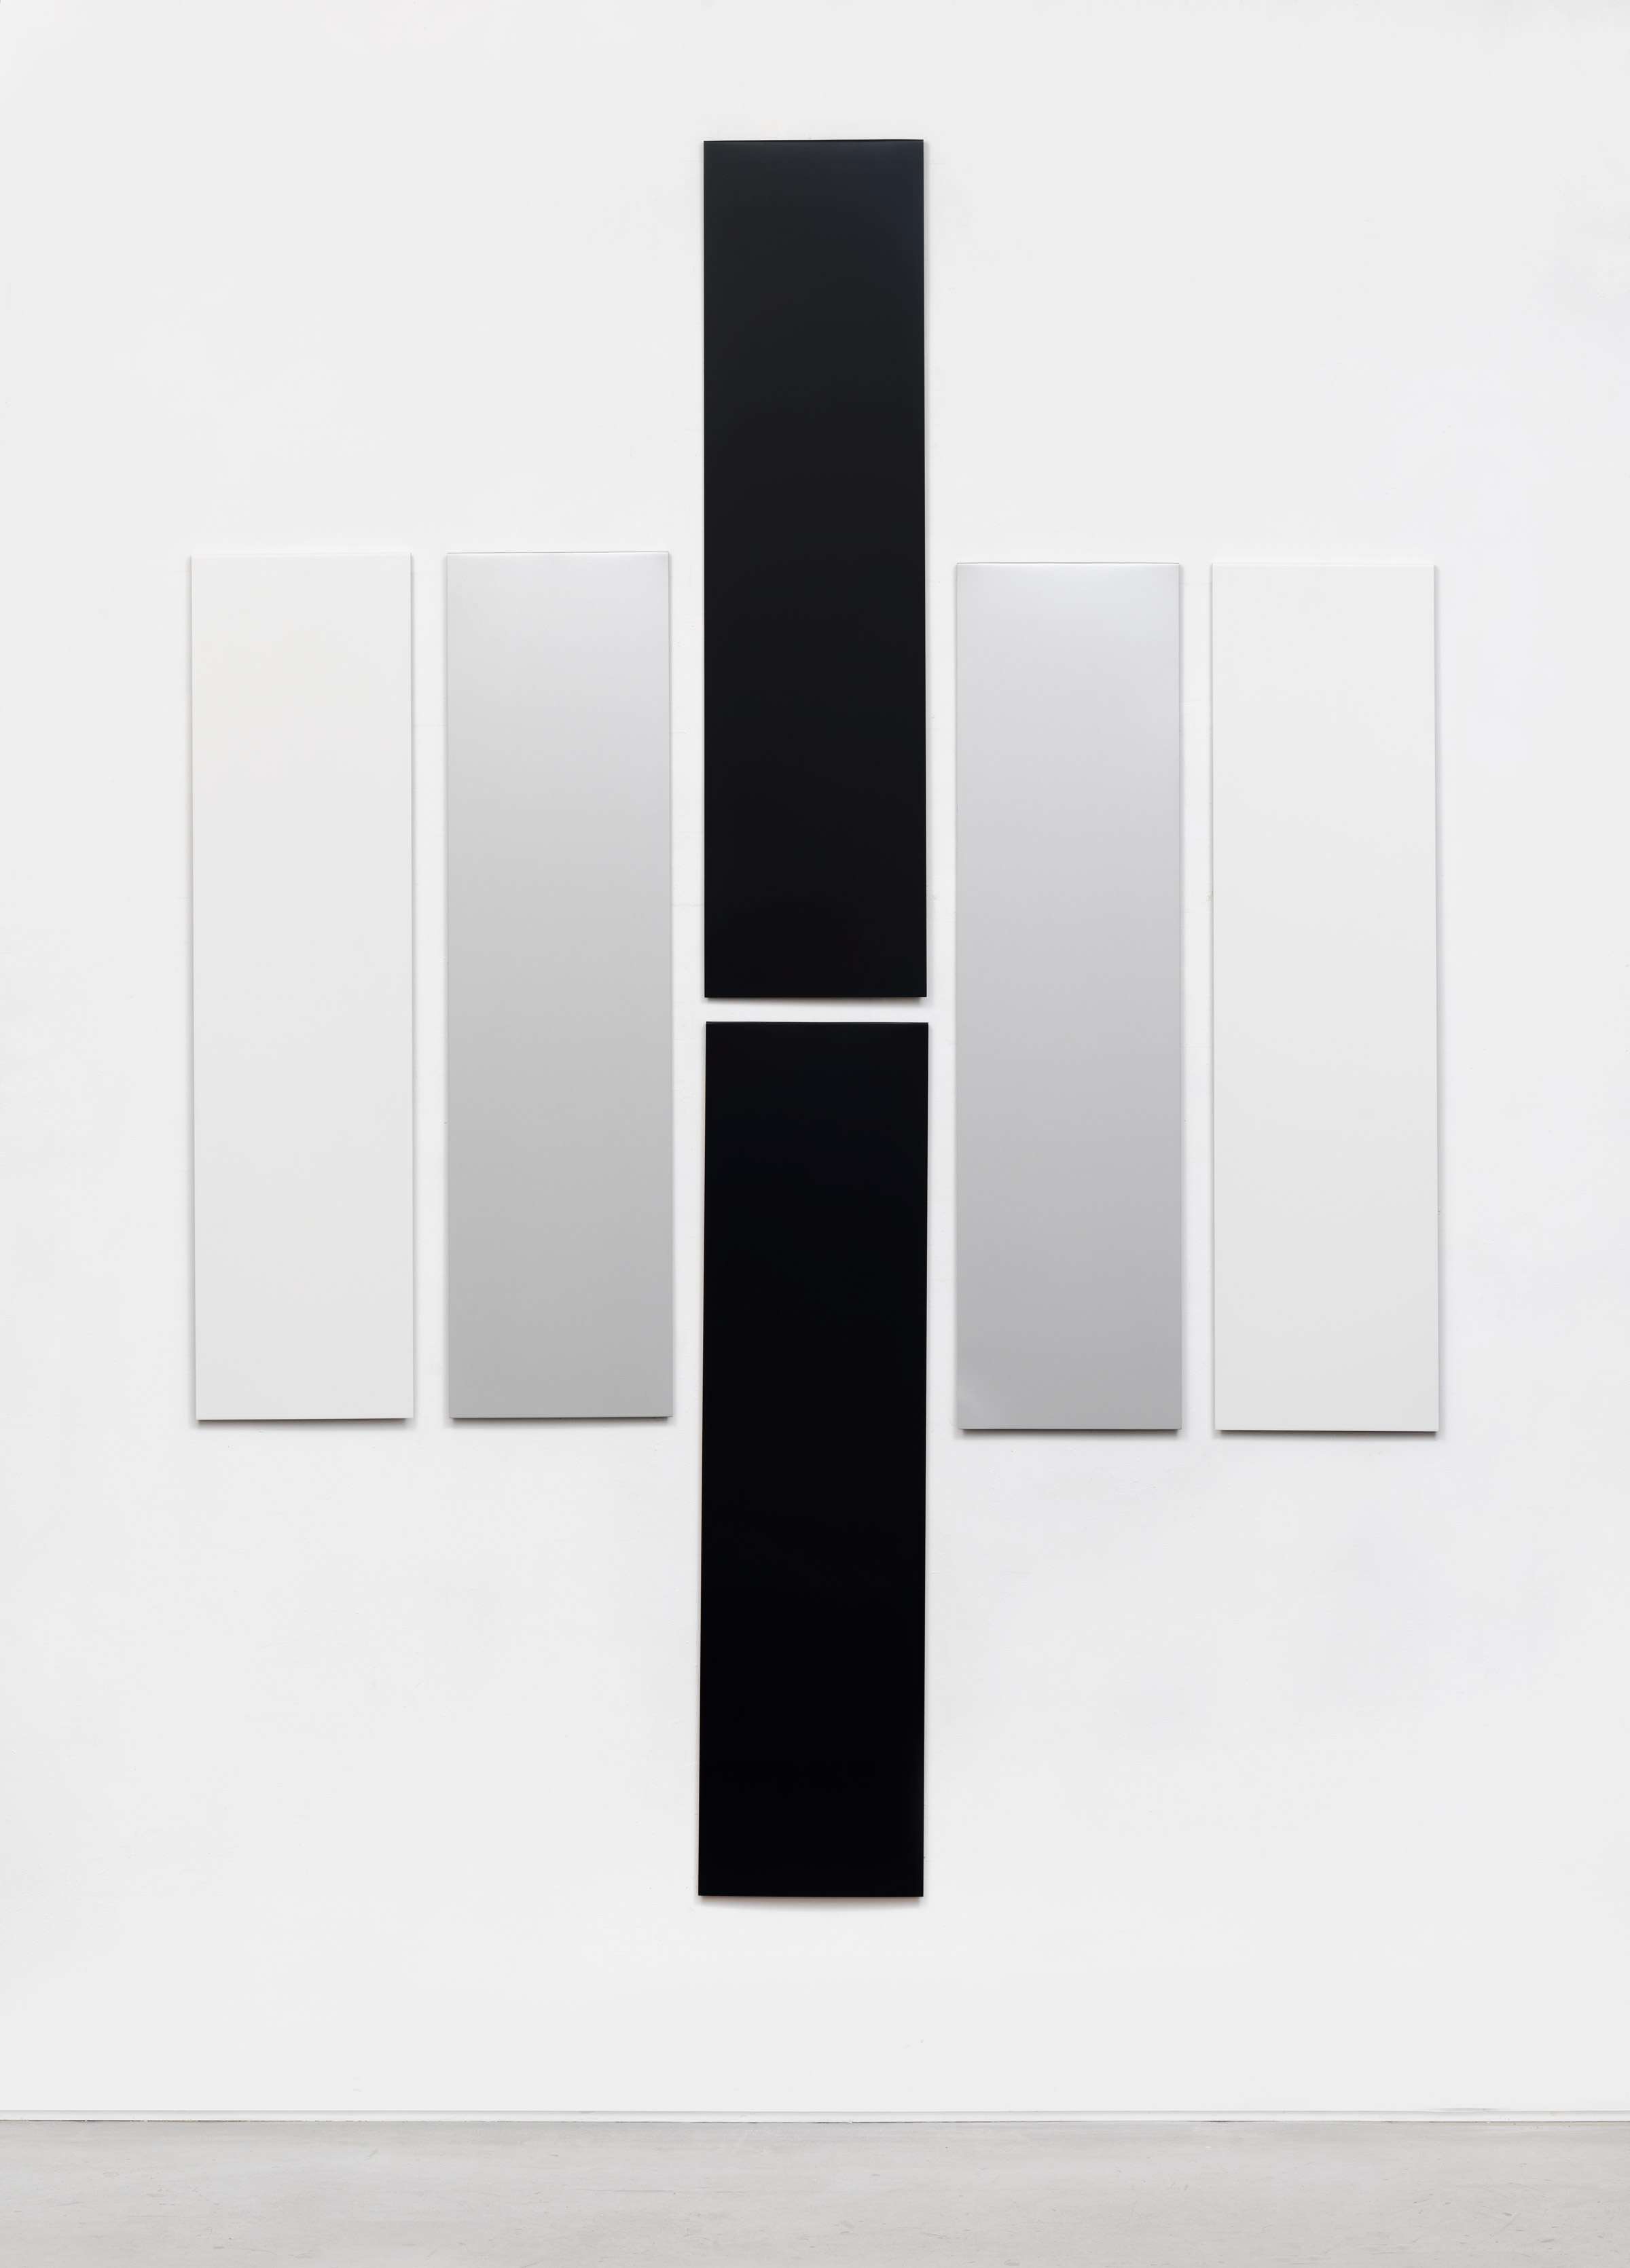 Don Dudley. Untitled (Aluminum Module), 1973-2018, acrylic lacquer on aluminum, each module 46.75 x 12 in; overall 96 x 68 in.